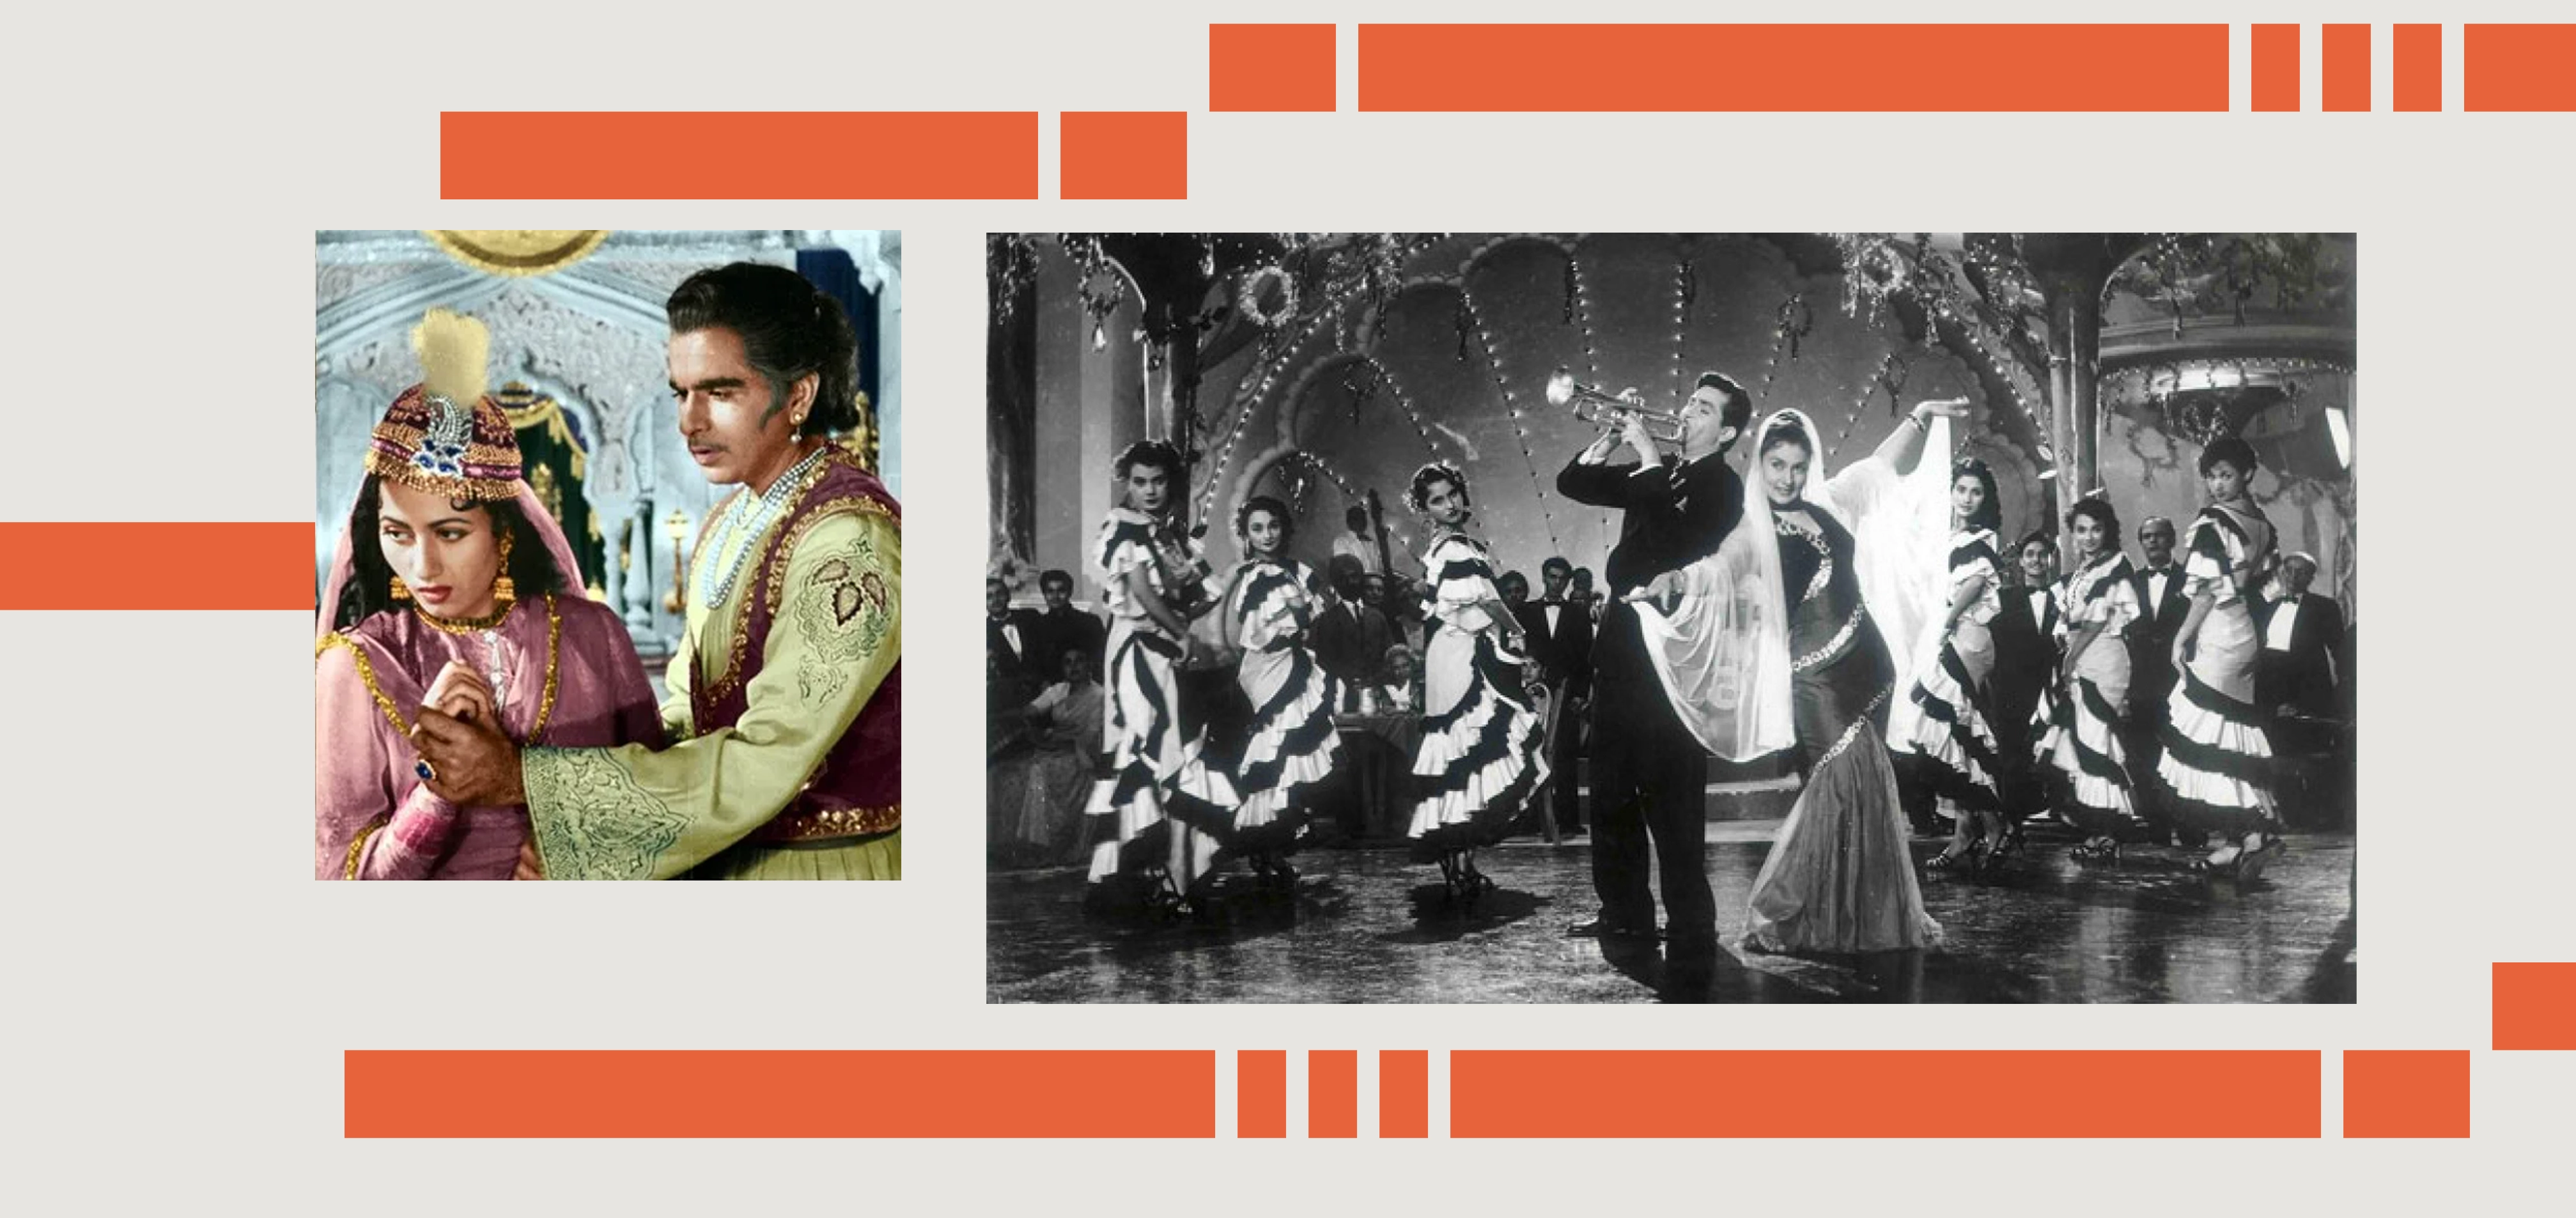 The 50s and 60s era celebrated Indian identity, with women's fashion turning to brighter shades. Men's fashion on the other hand, went Western with suits and sleek hairstyles